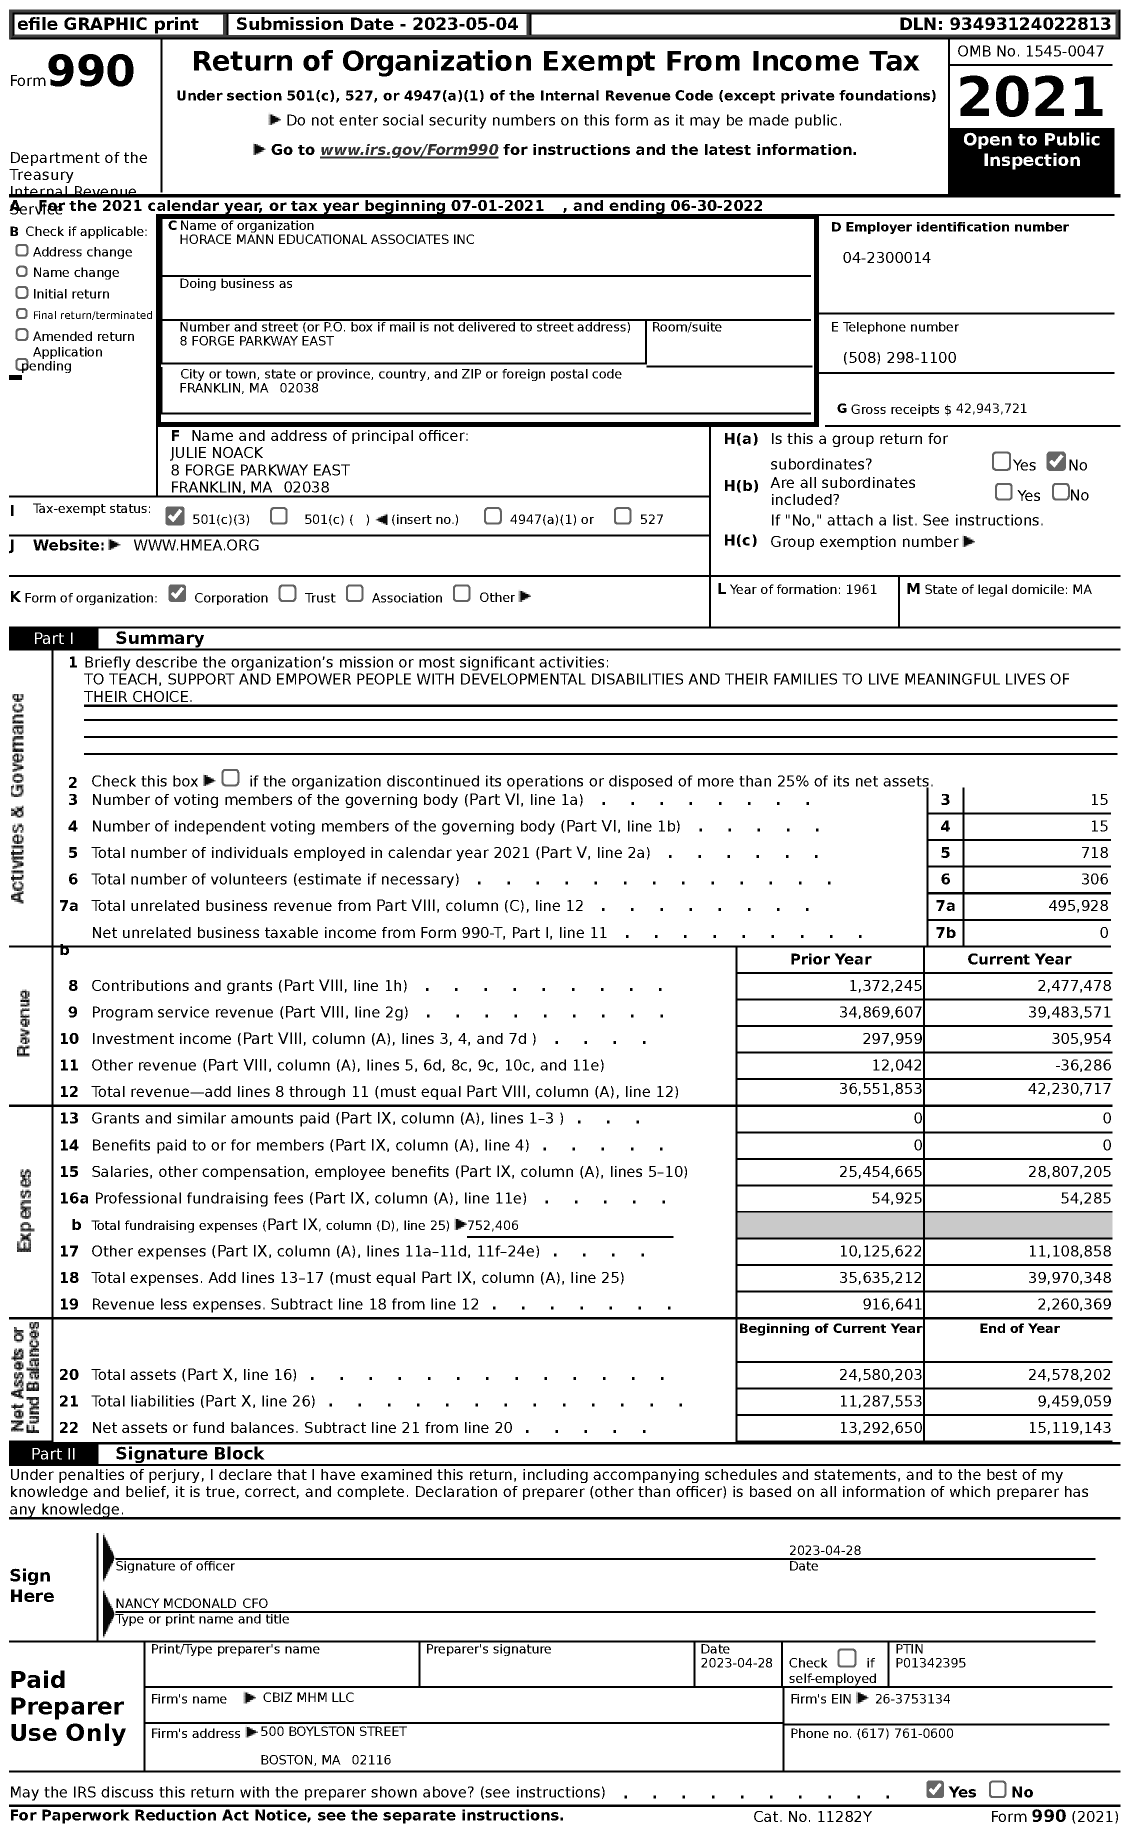 Image of first page of 2021 Form 990 for Horace Mann Educational Associates